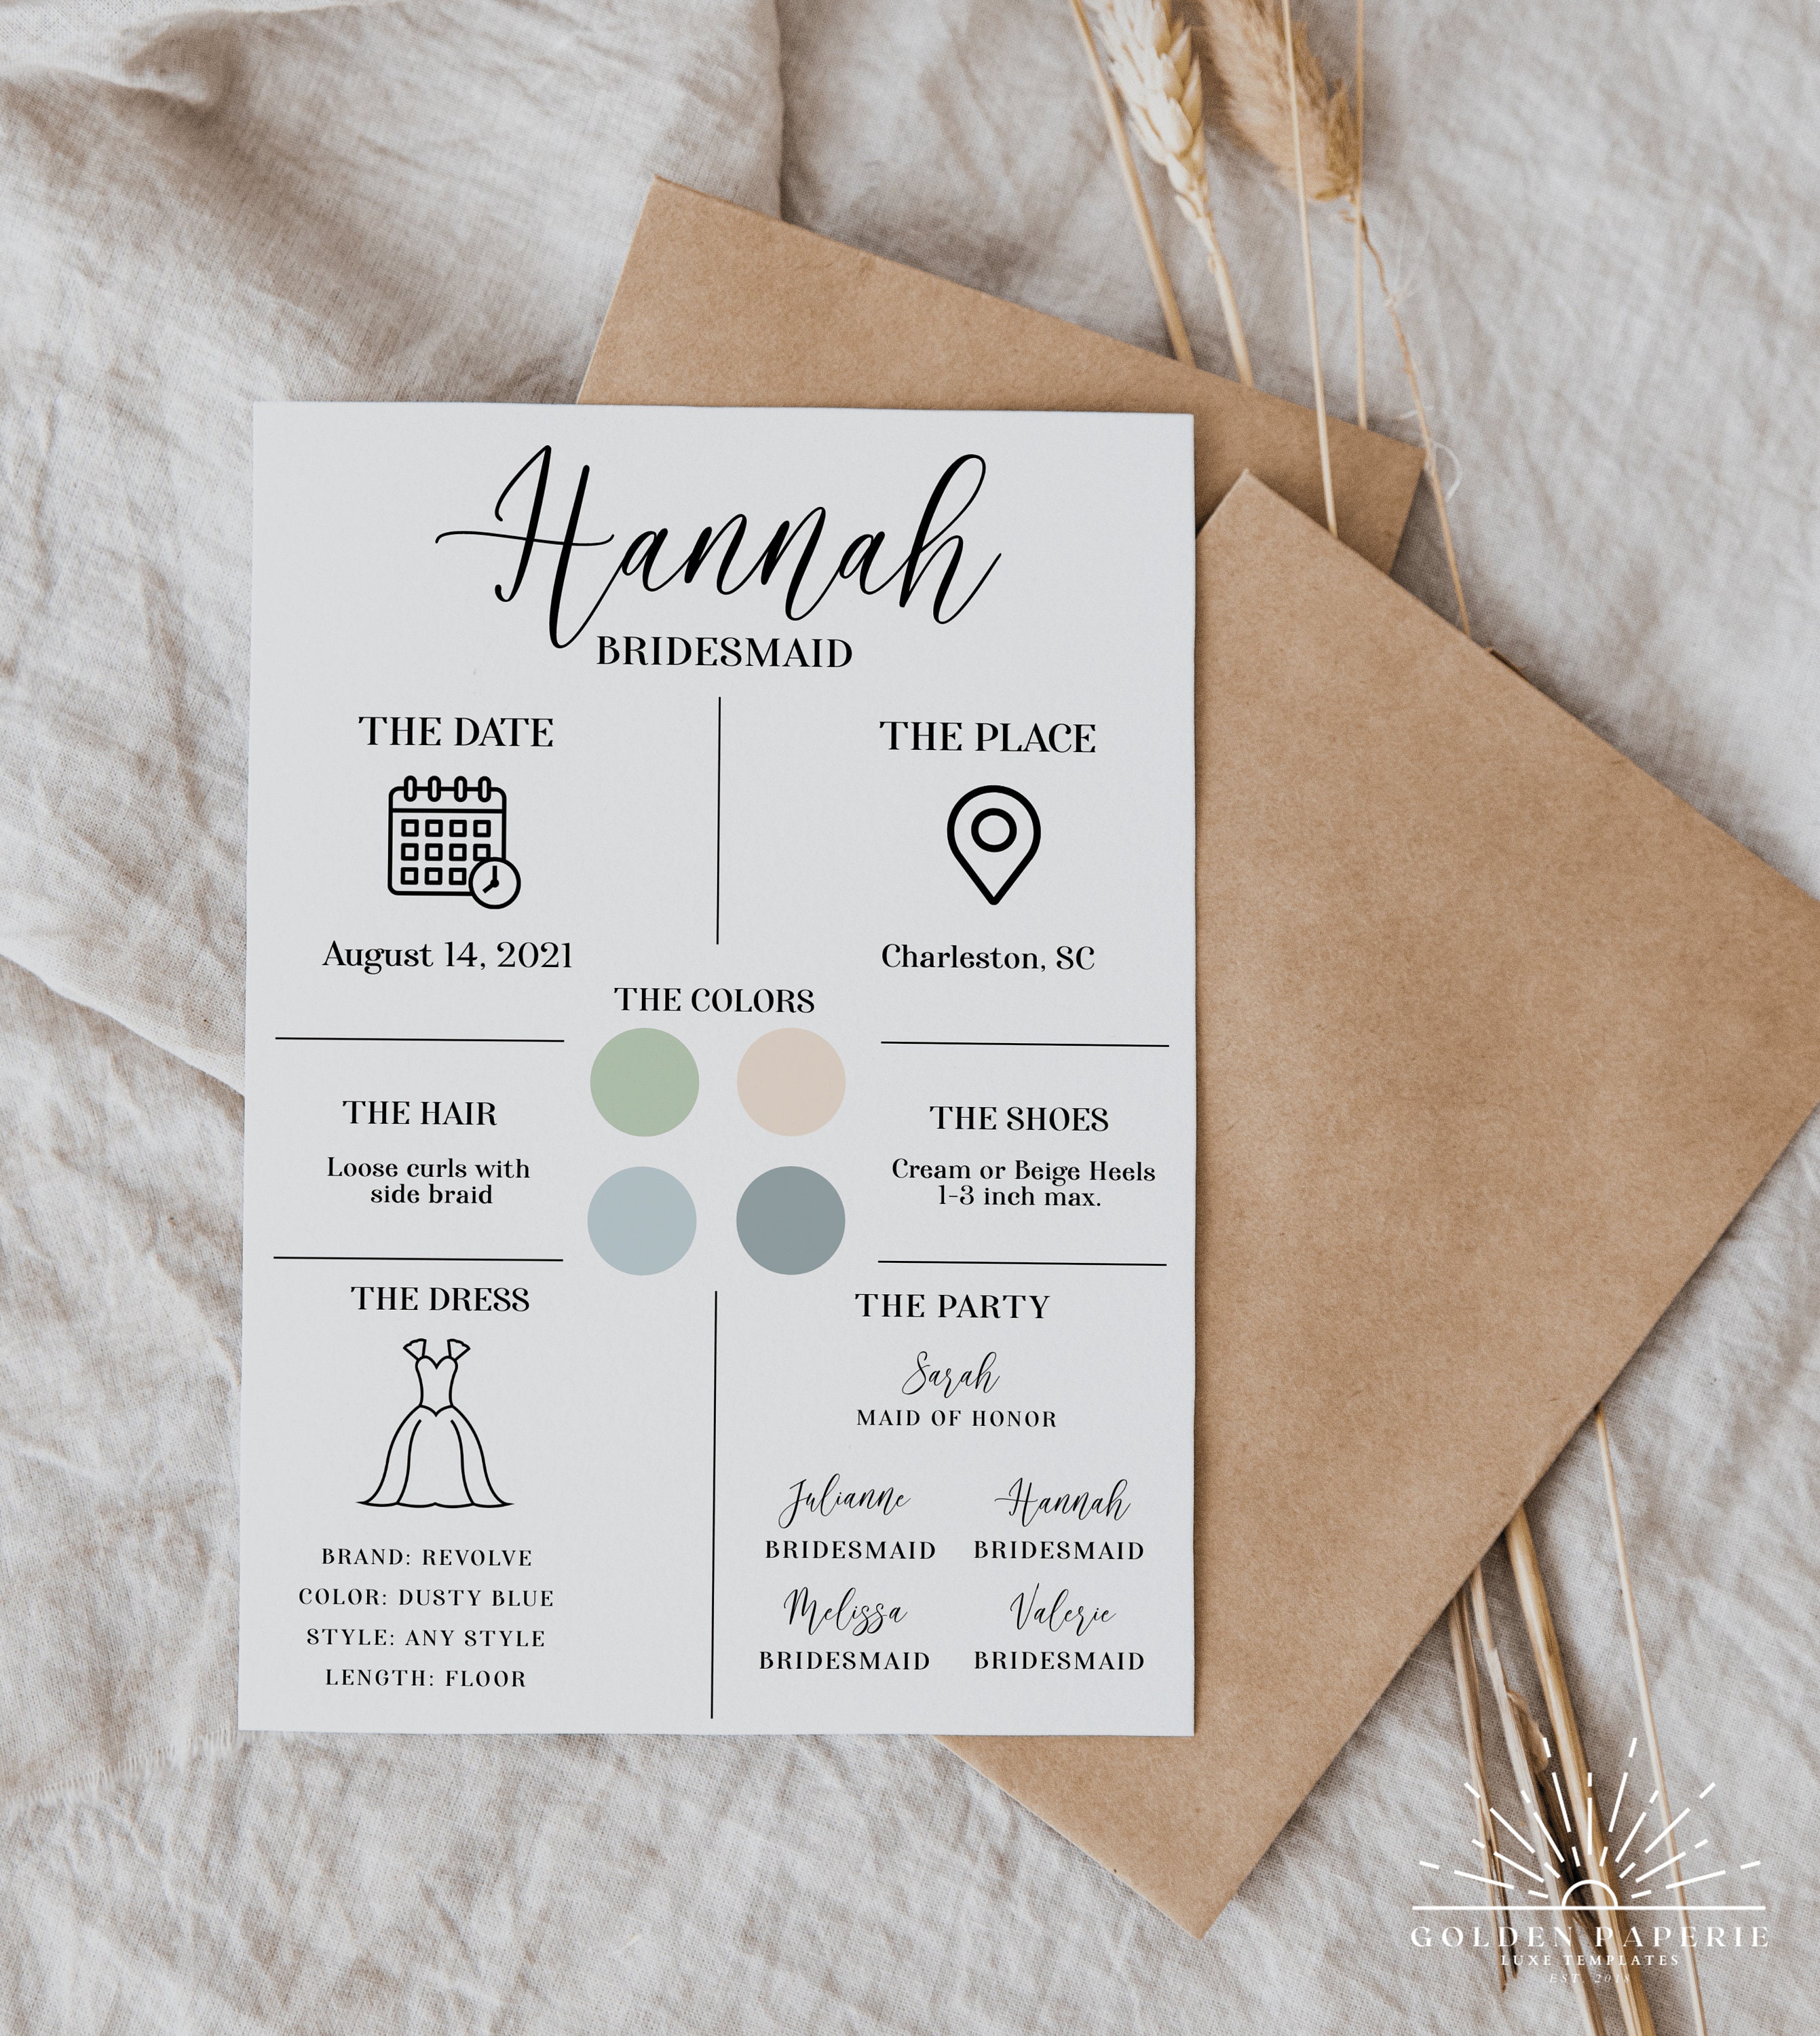 bridesmaid-info-card-template-bridal-party-info-card-etsy